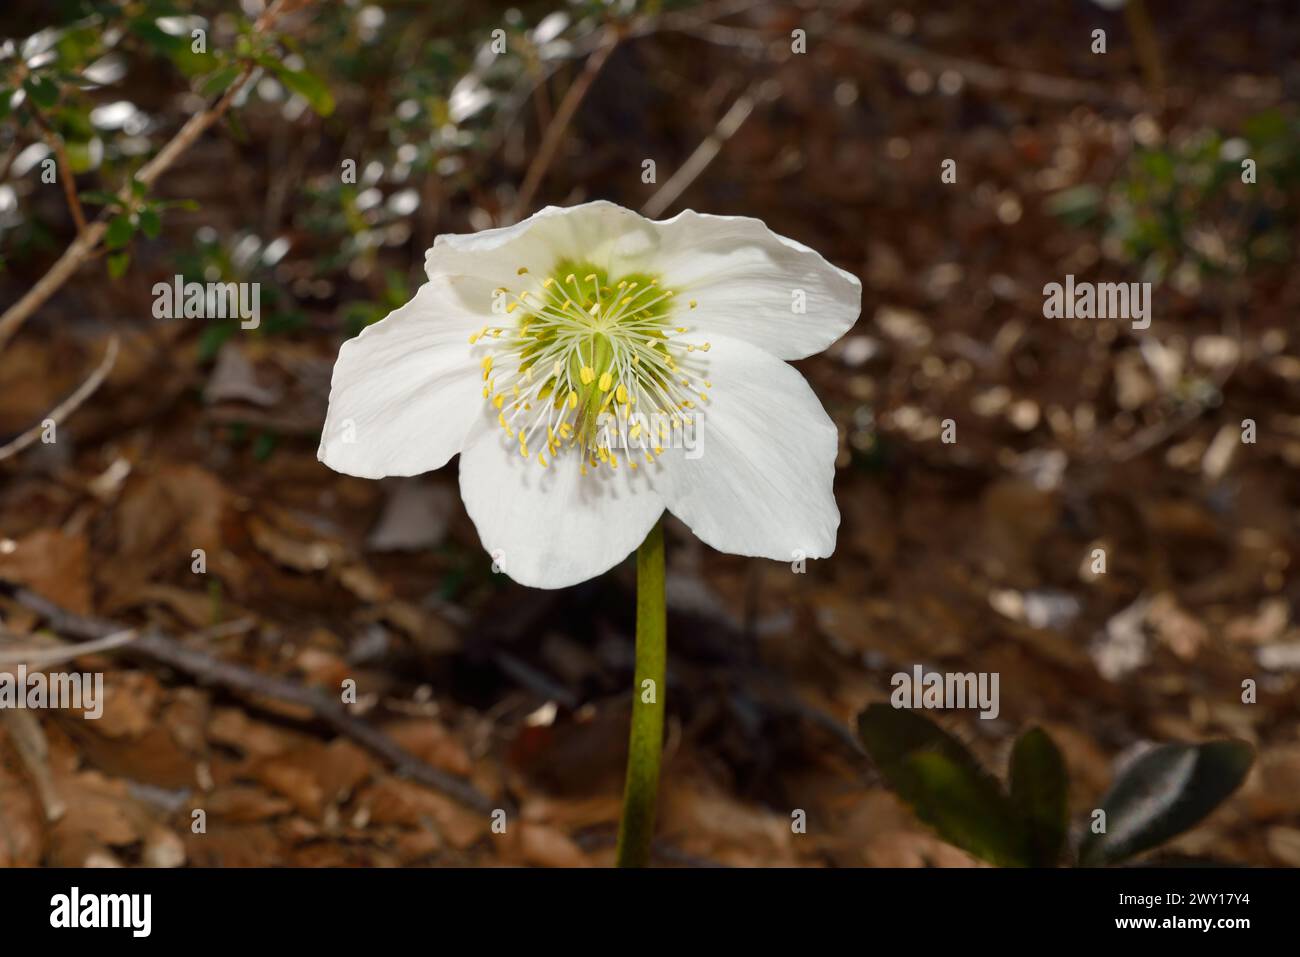 Christmas Rose or Black Hellebore (Helleborus niger) among the leaves of the undergrowth Stock Photo